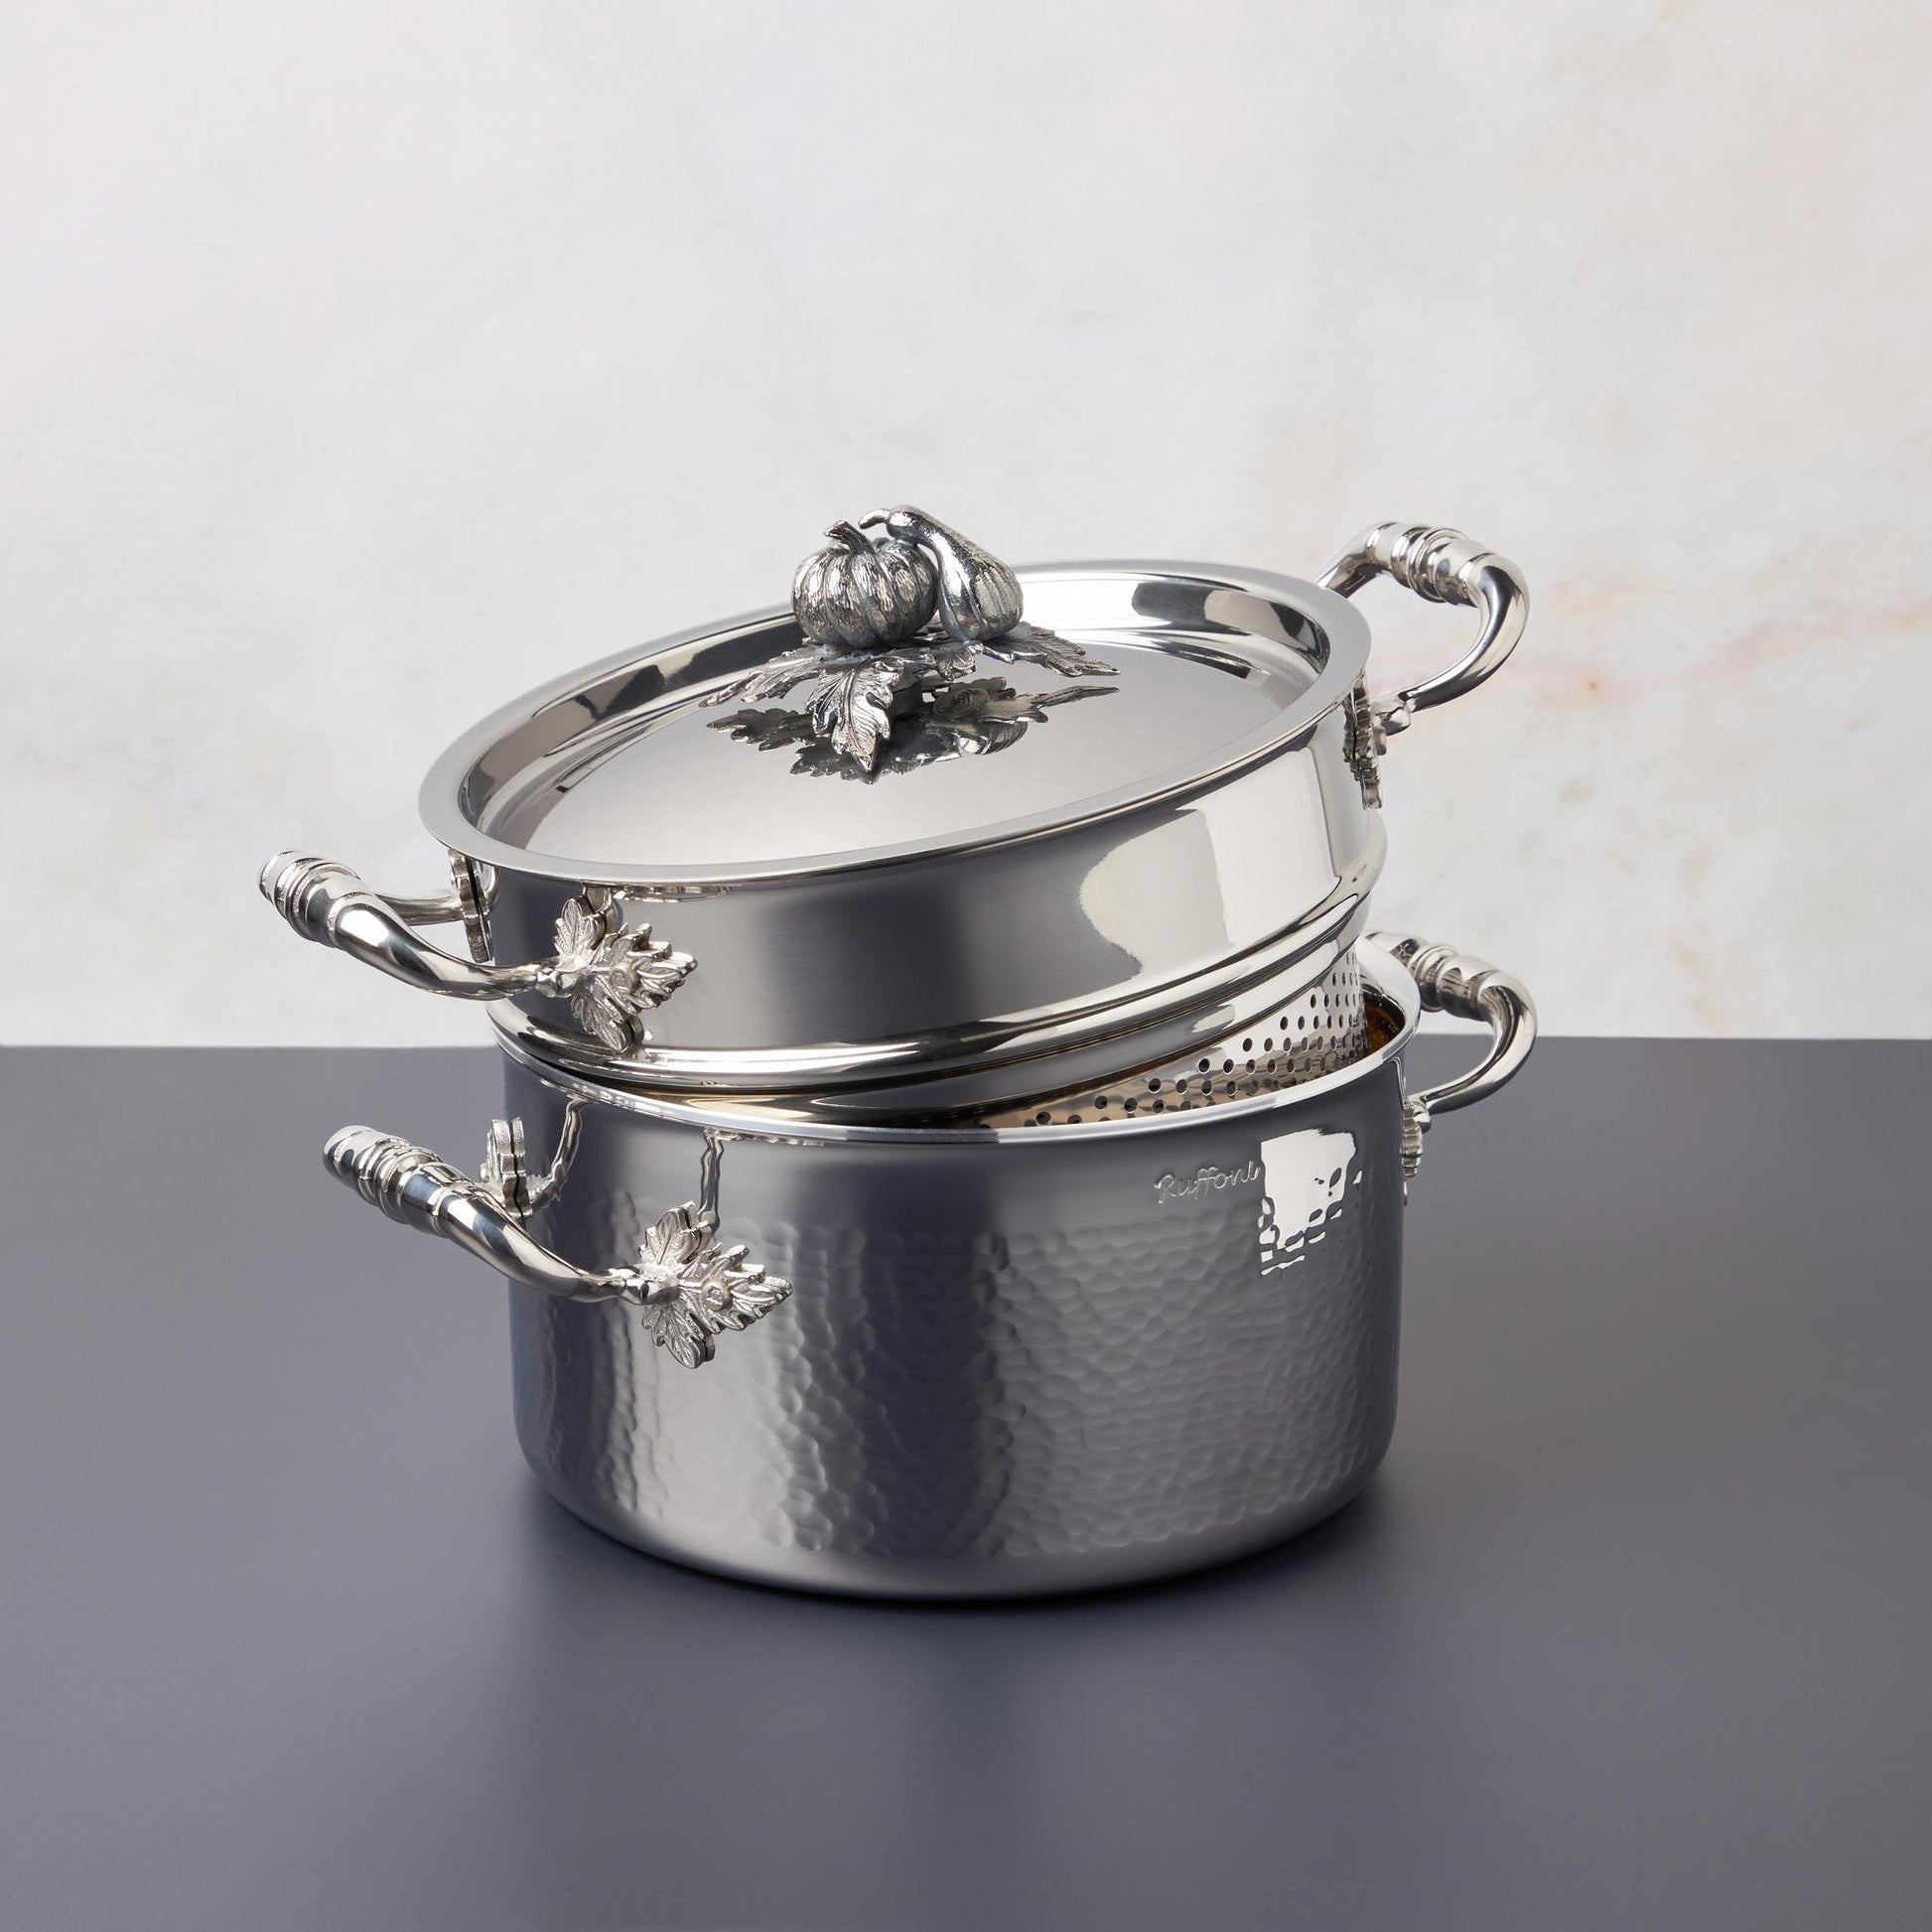 Opus Prima hammered clad stainless steel soup pot with decorated silver-plated lid knob finial from Ruffoni